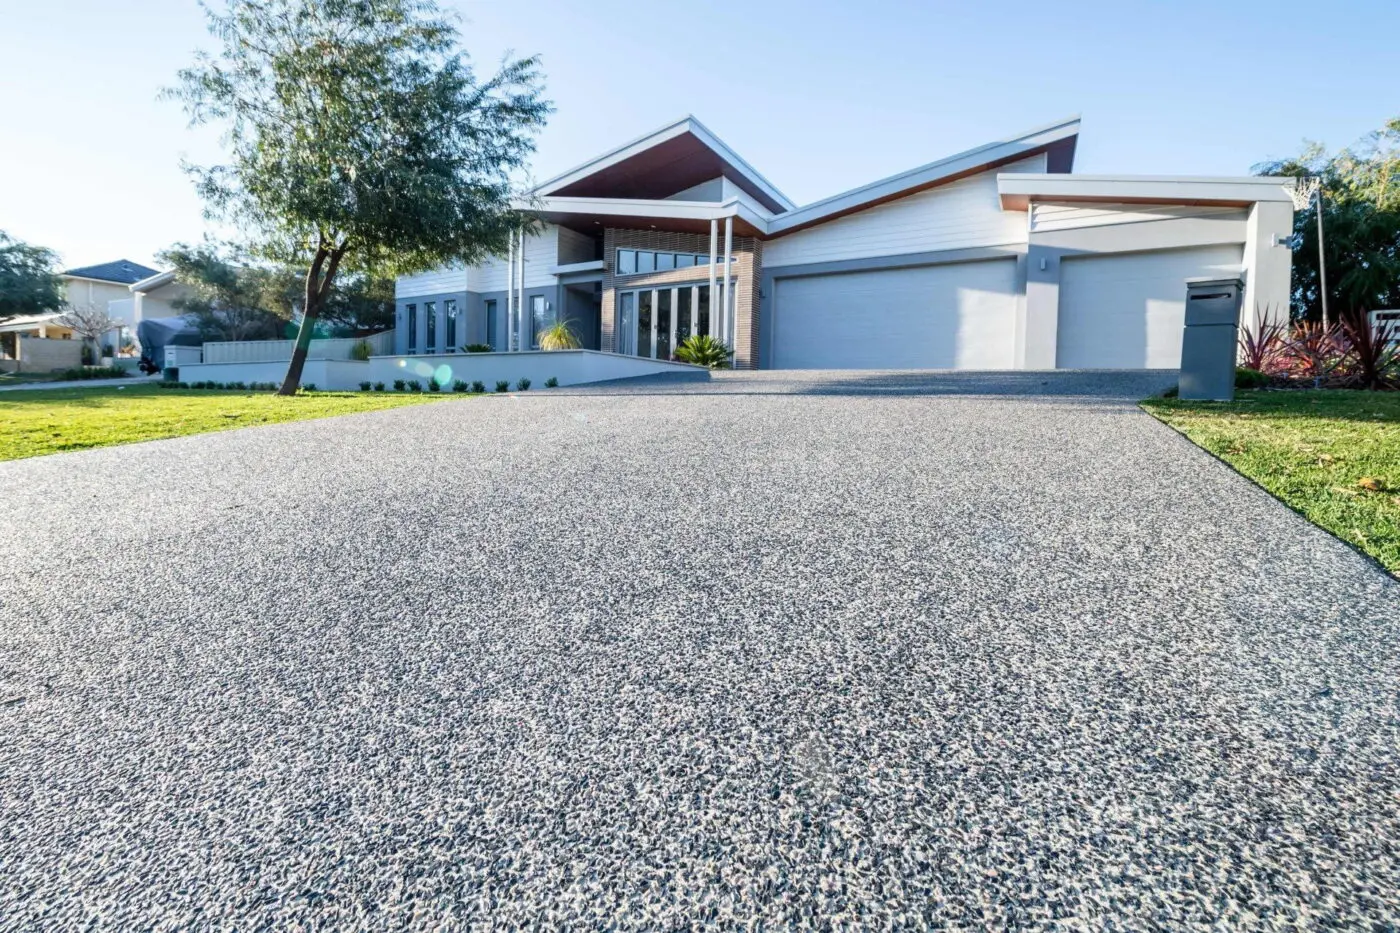 Modern single-story house with a wide driveway leading up to a three-car garage. Featuring Sun Valley decorative concrete by Reno Concrete Solutions, the sleek design boasts large windows and a landscaped front yard with green grass and trees. The sky is clear and blue.